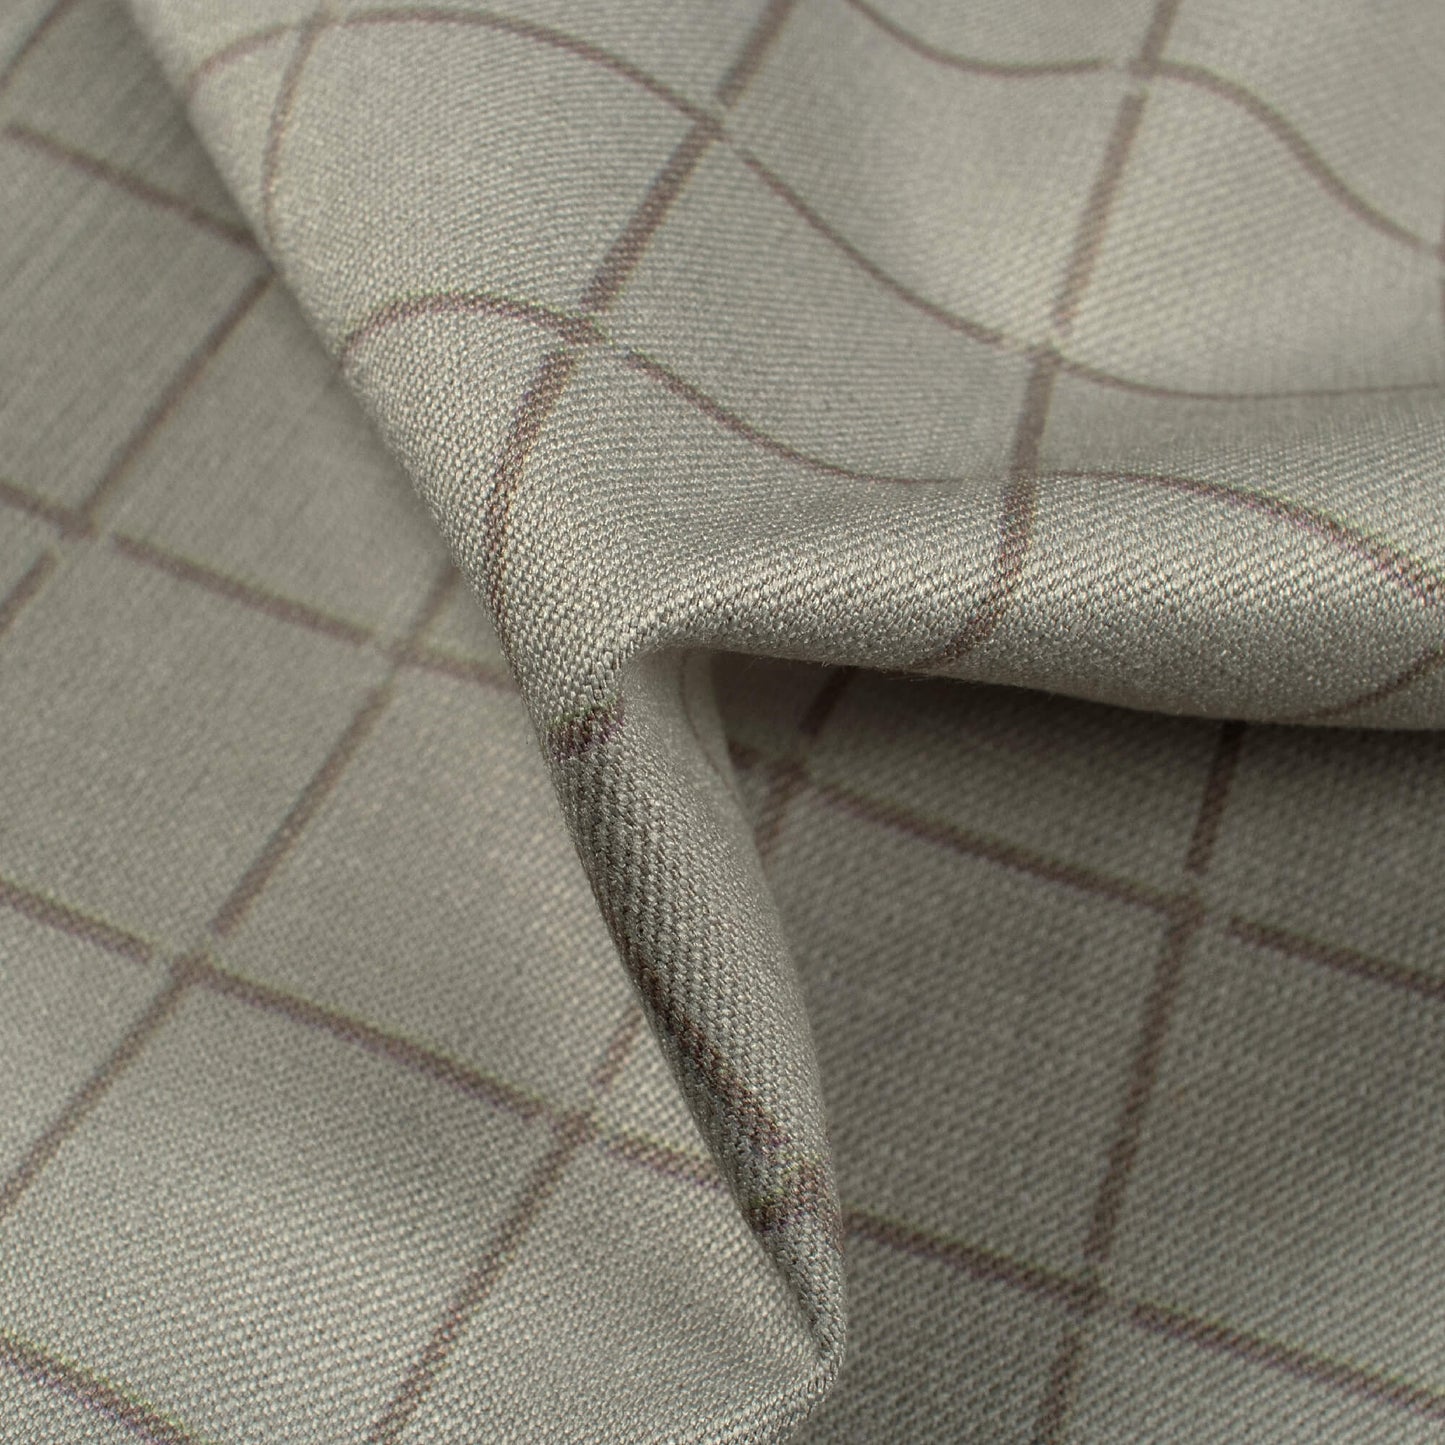 Dolphin Grey Checks Printed Luxury Suiting Fabric